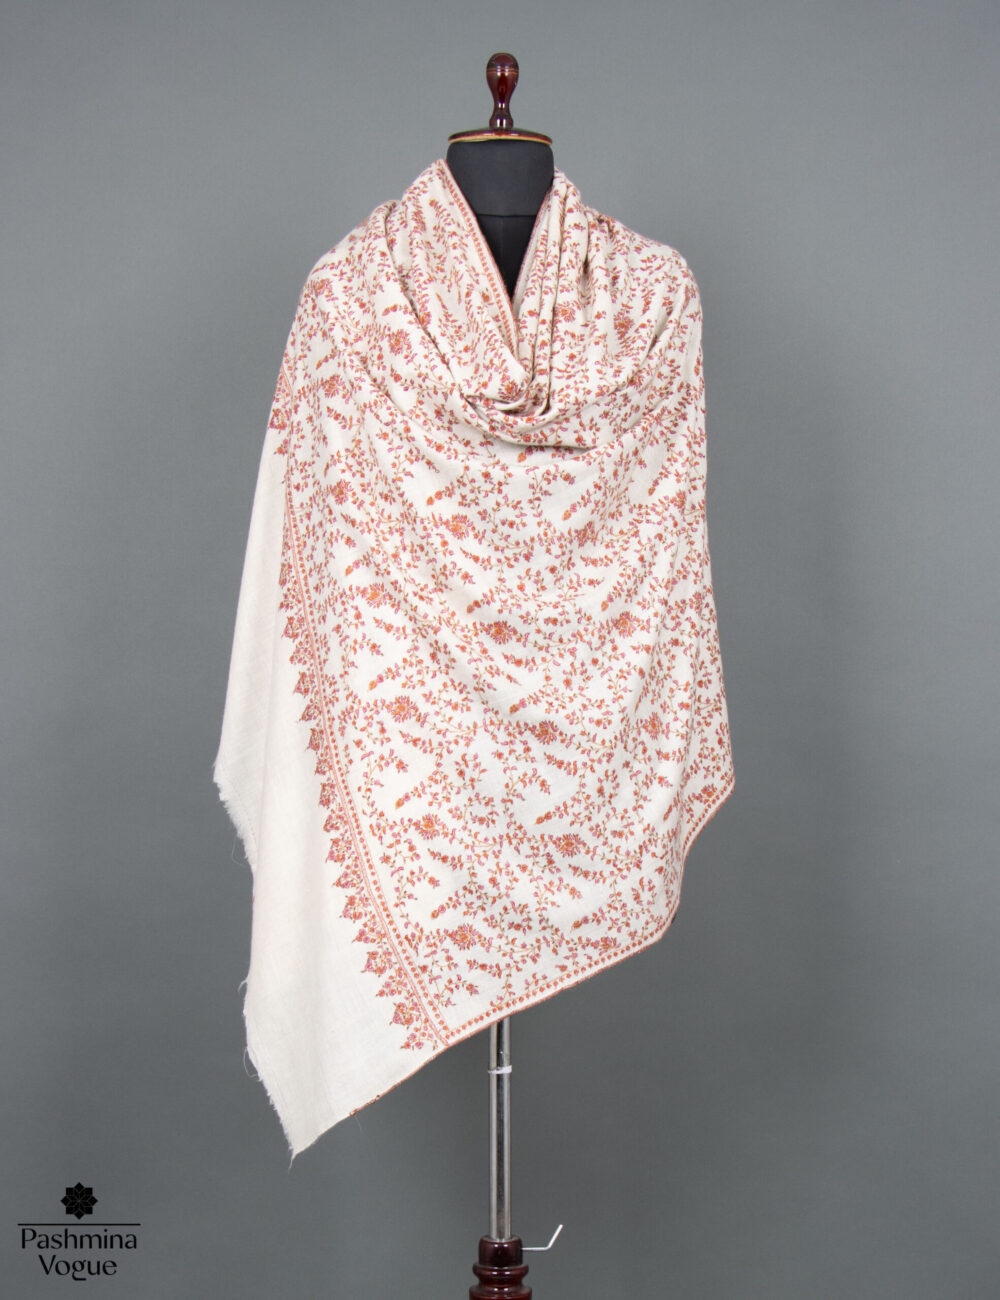 where-does-pashmina-come-from